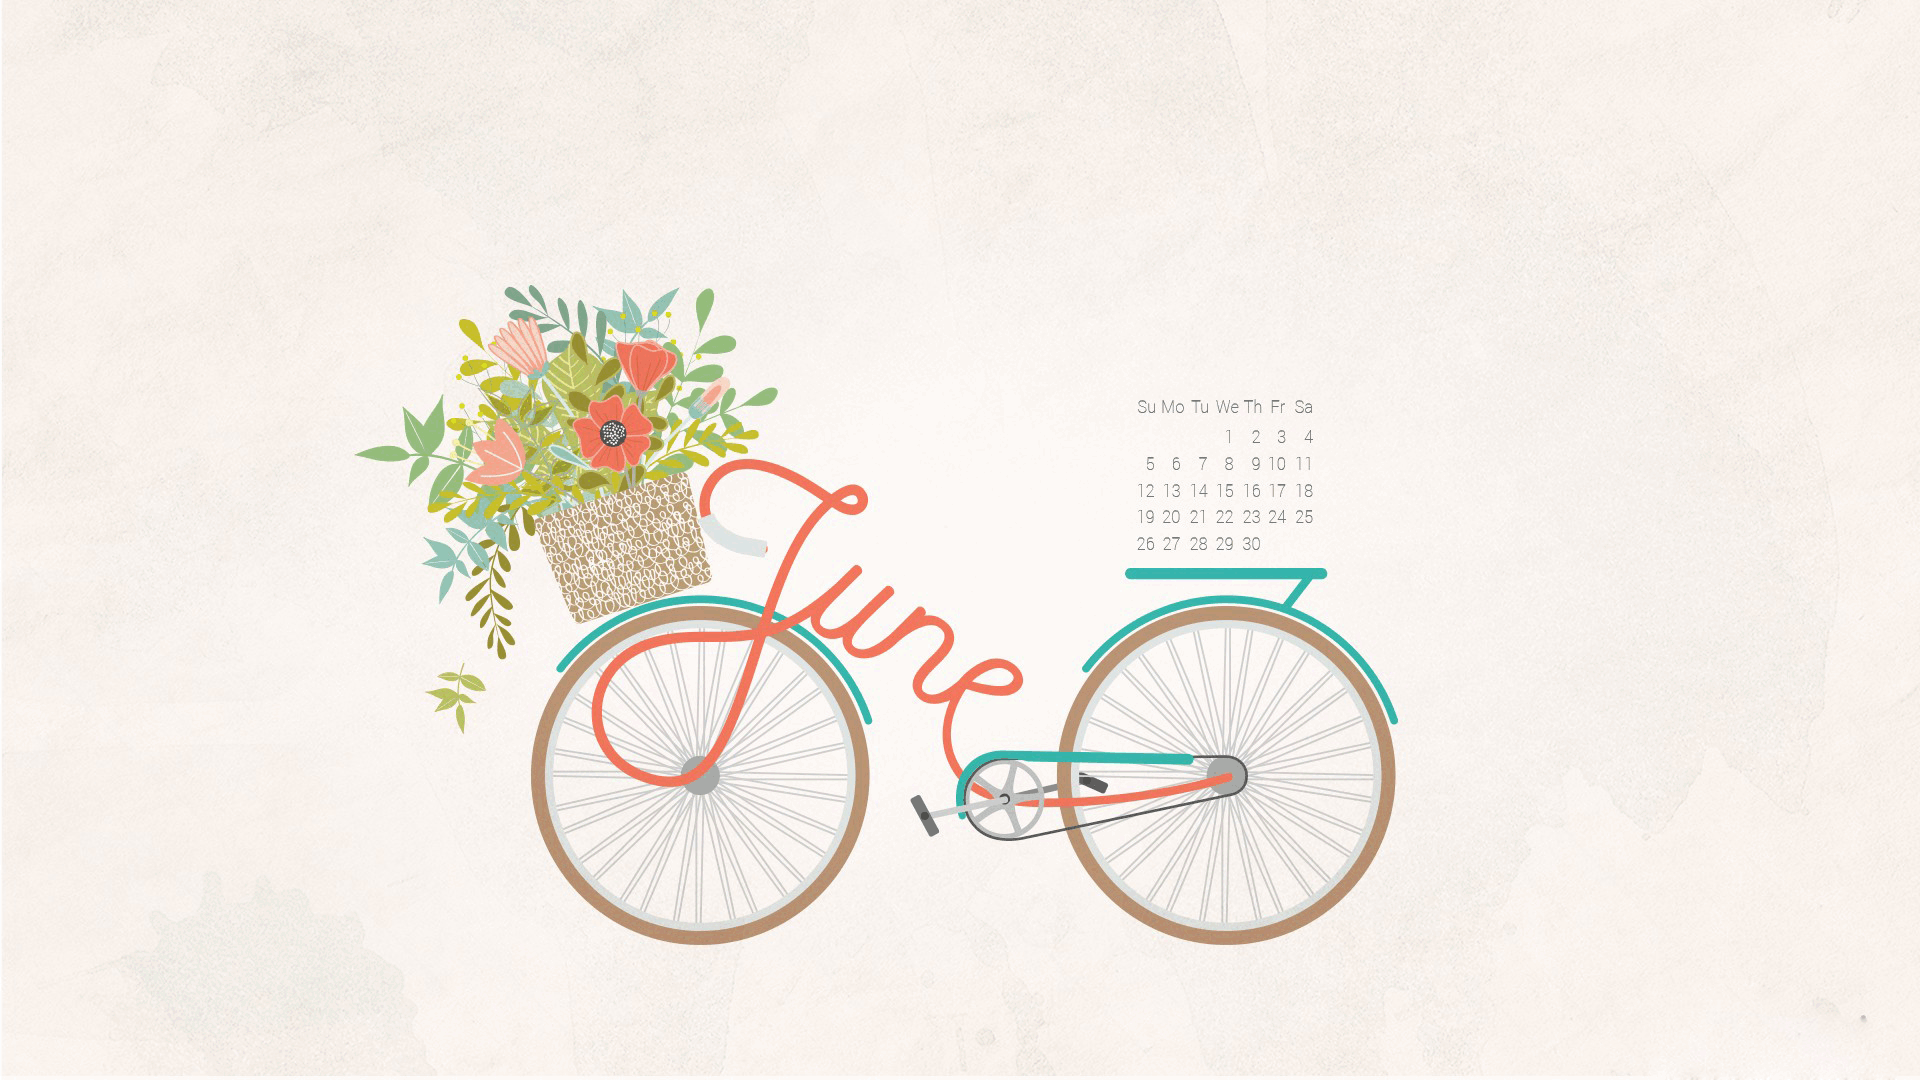 Wallpaper With June Calendar For Pc iPad And Smartphone